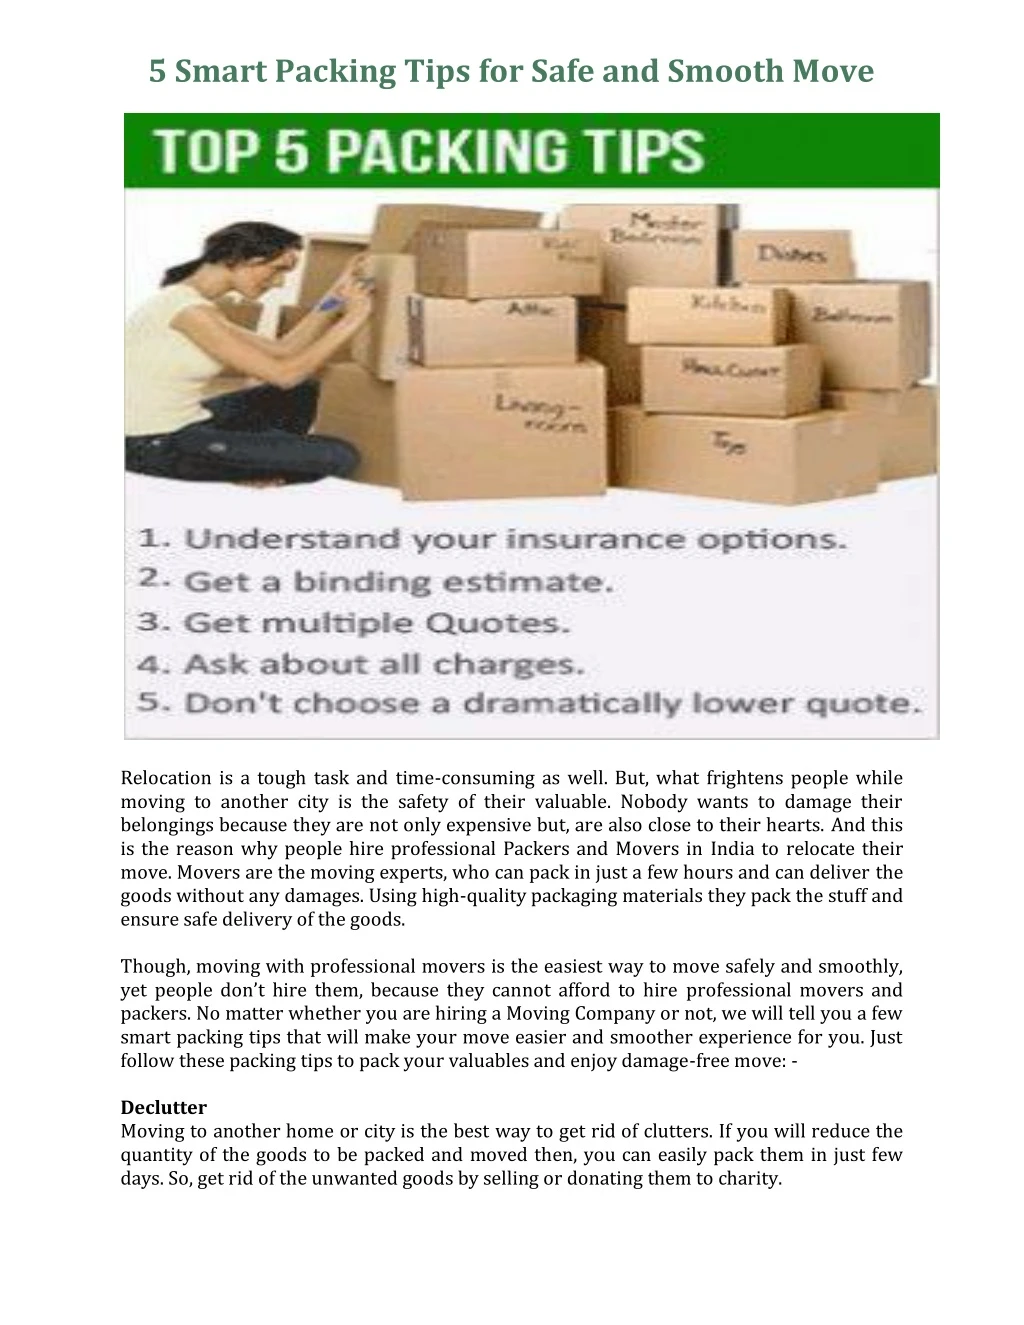 5 smart packing tips for safe and smooth move